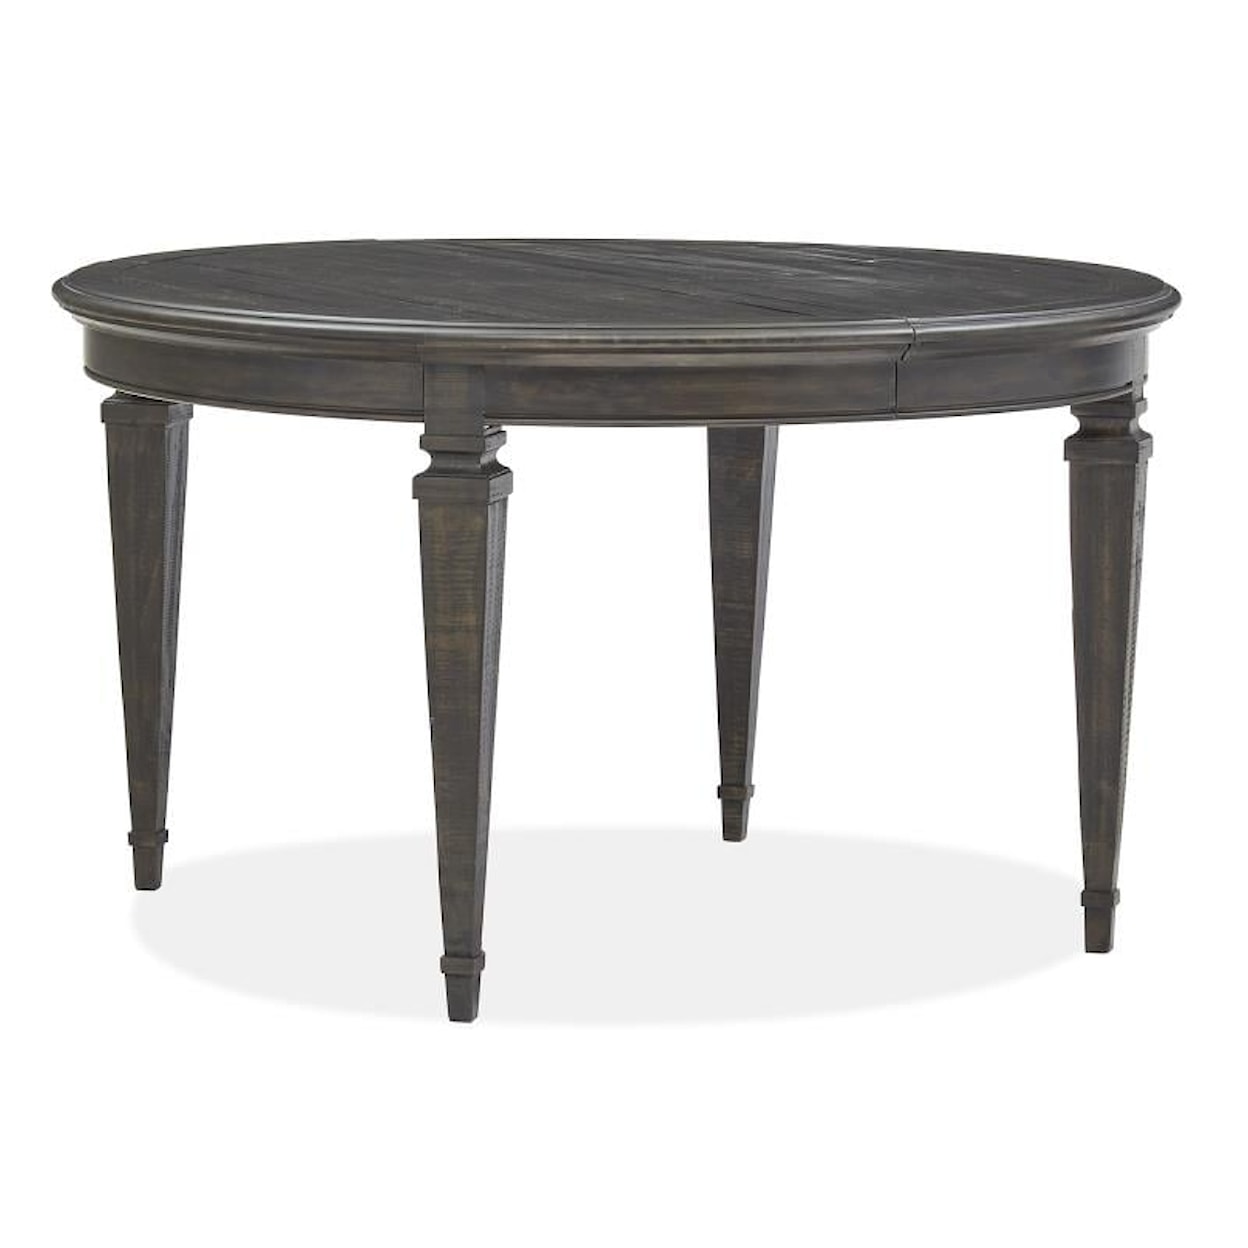 Belfort Select Solage Round Dining Table